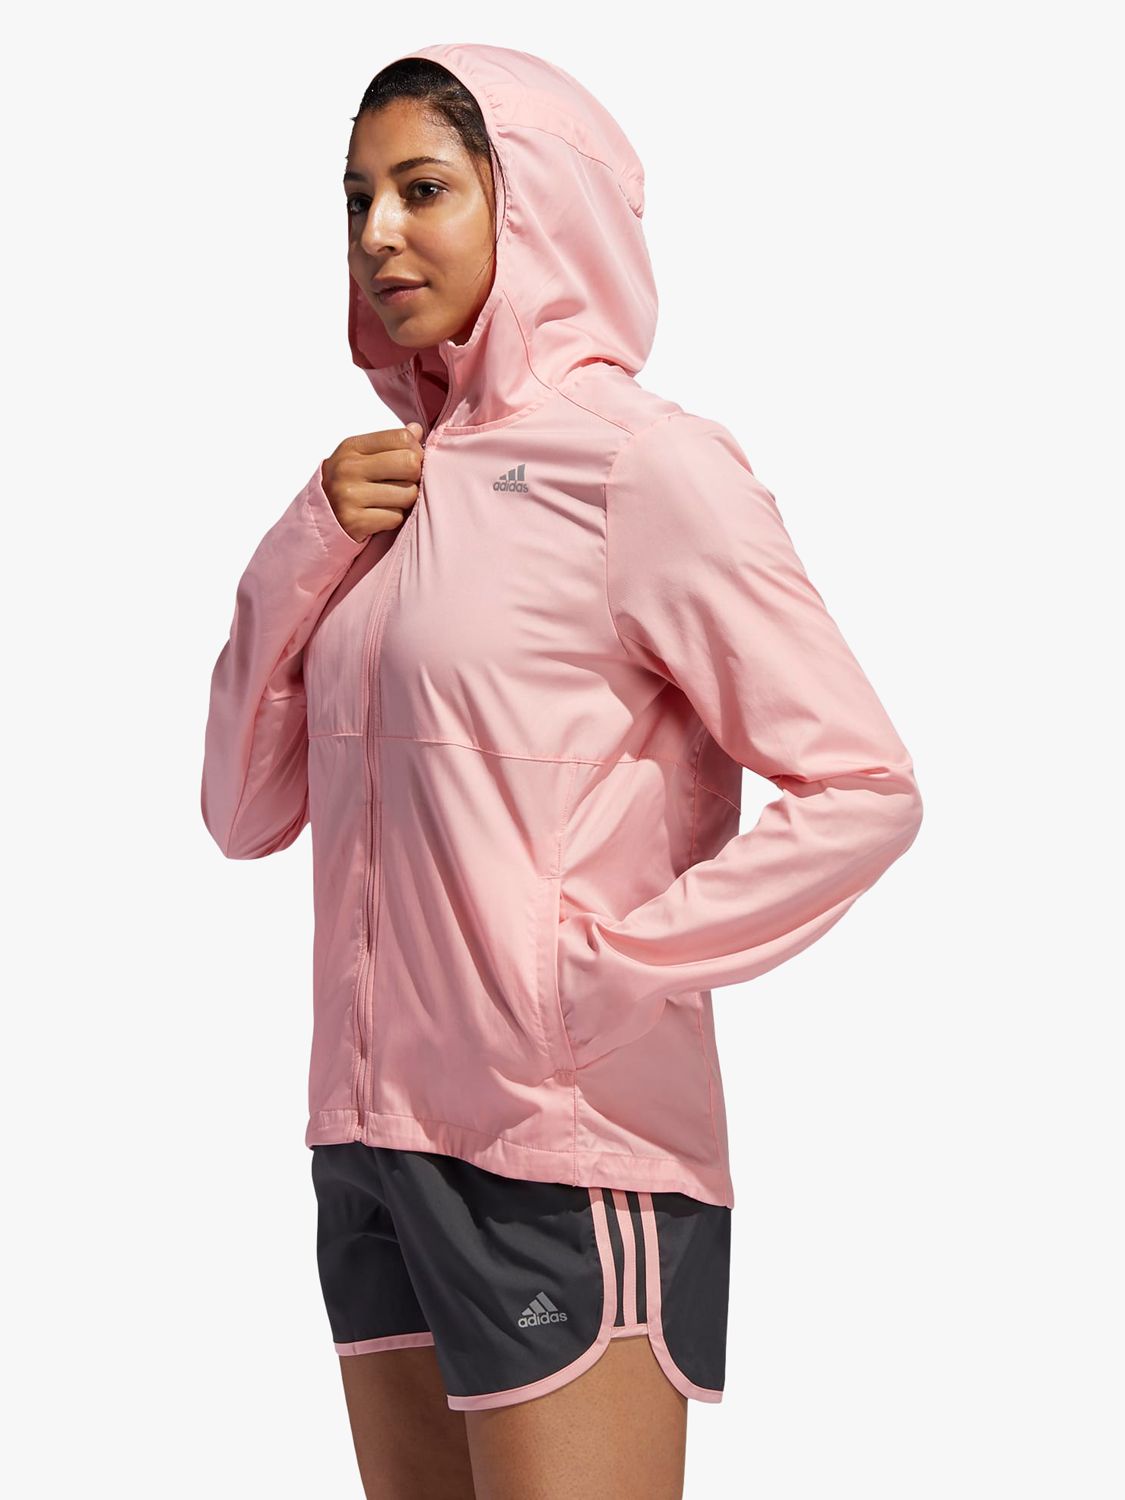 create your own adidas jacket